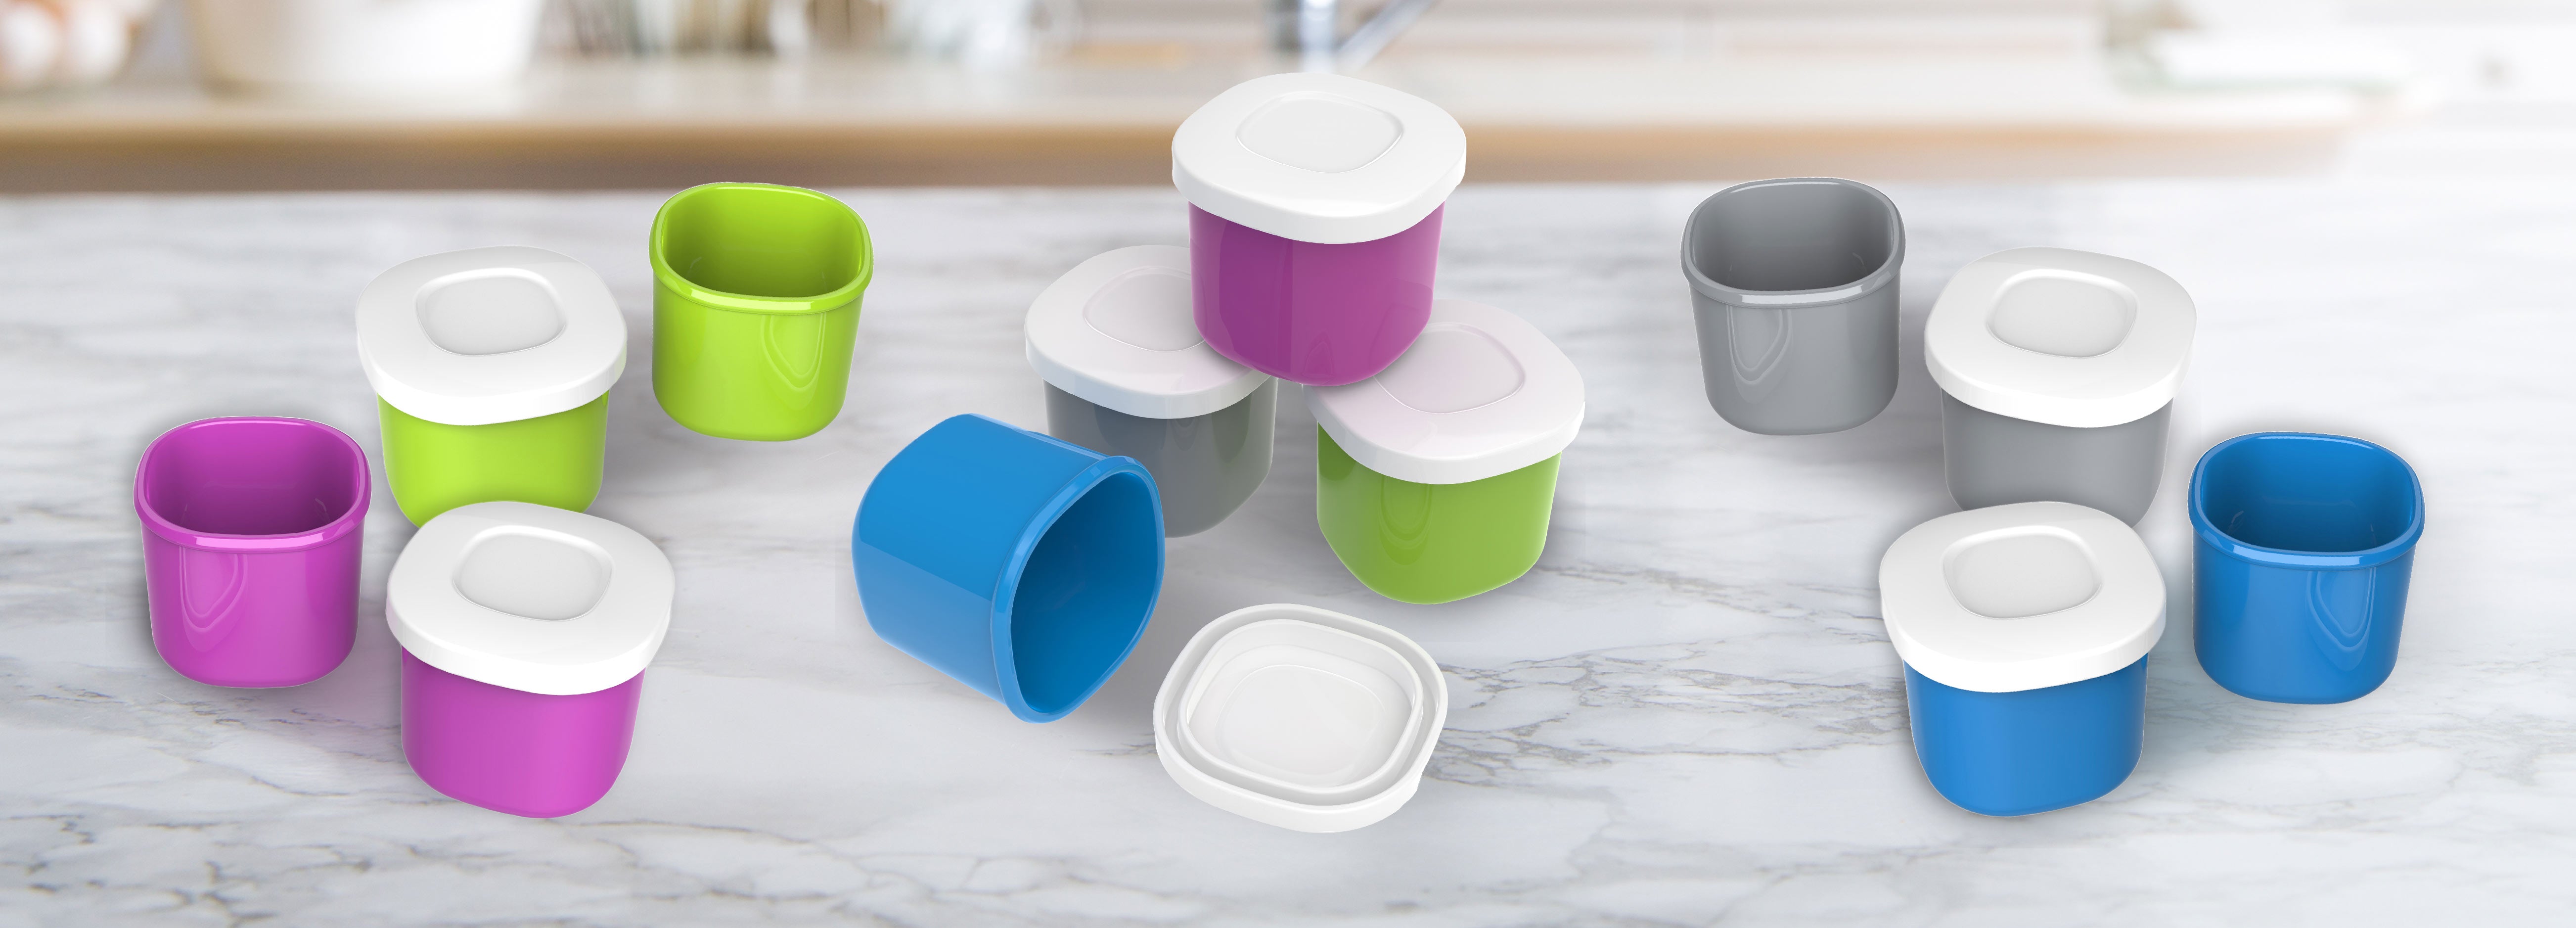 Bento Tek 3.7 x 2.2 x 1.1 inch Sauce Containers, 4 White Dipping Sauce Cups with Lids - with Blue Lid, Microwavable, Plastic Small Lunchbox Containers